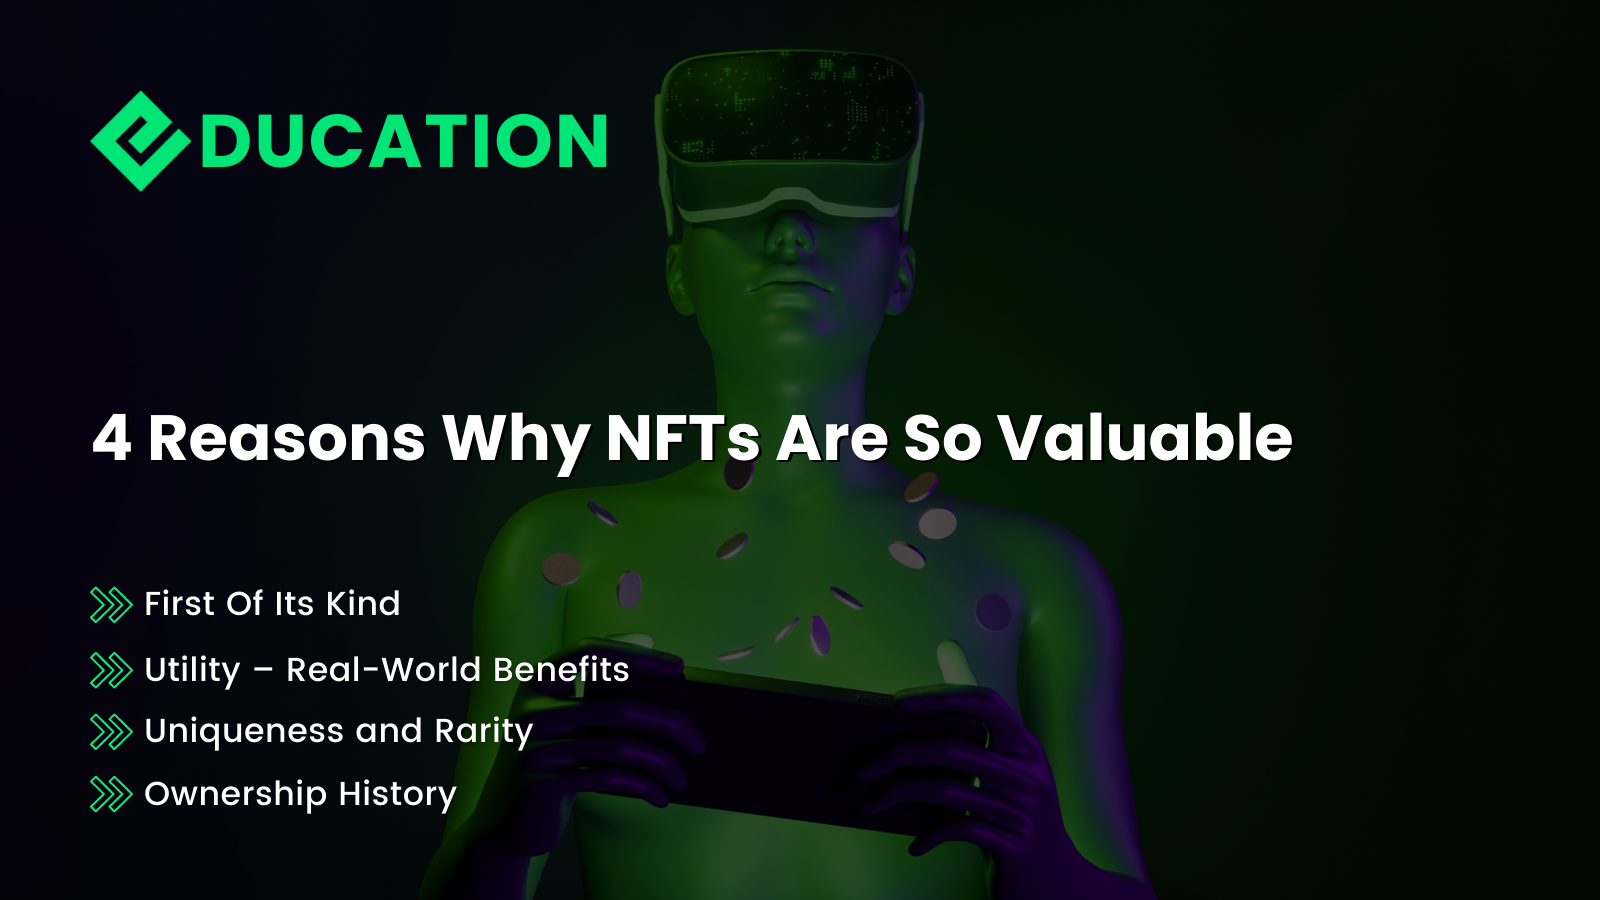 Cover image presenting 4 Reasons NFTs are valuable